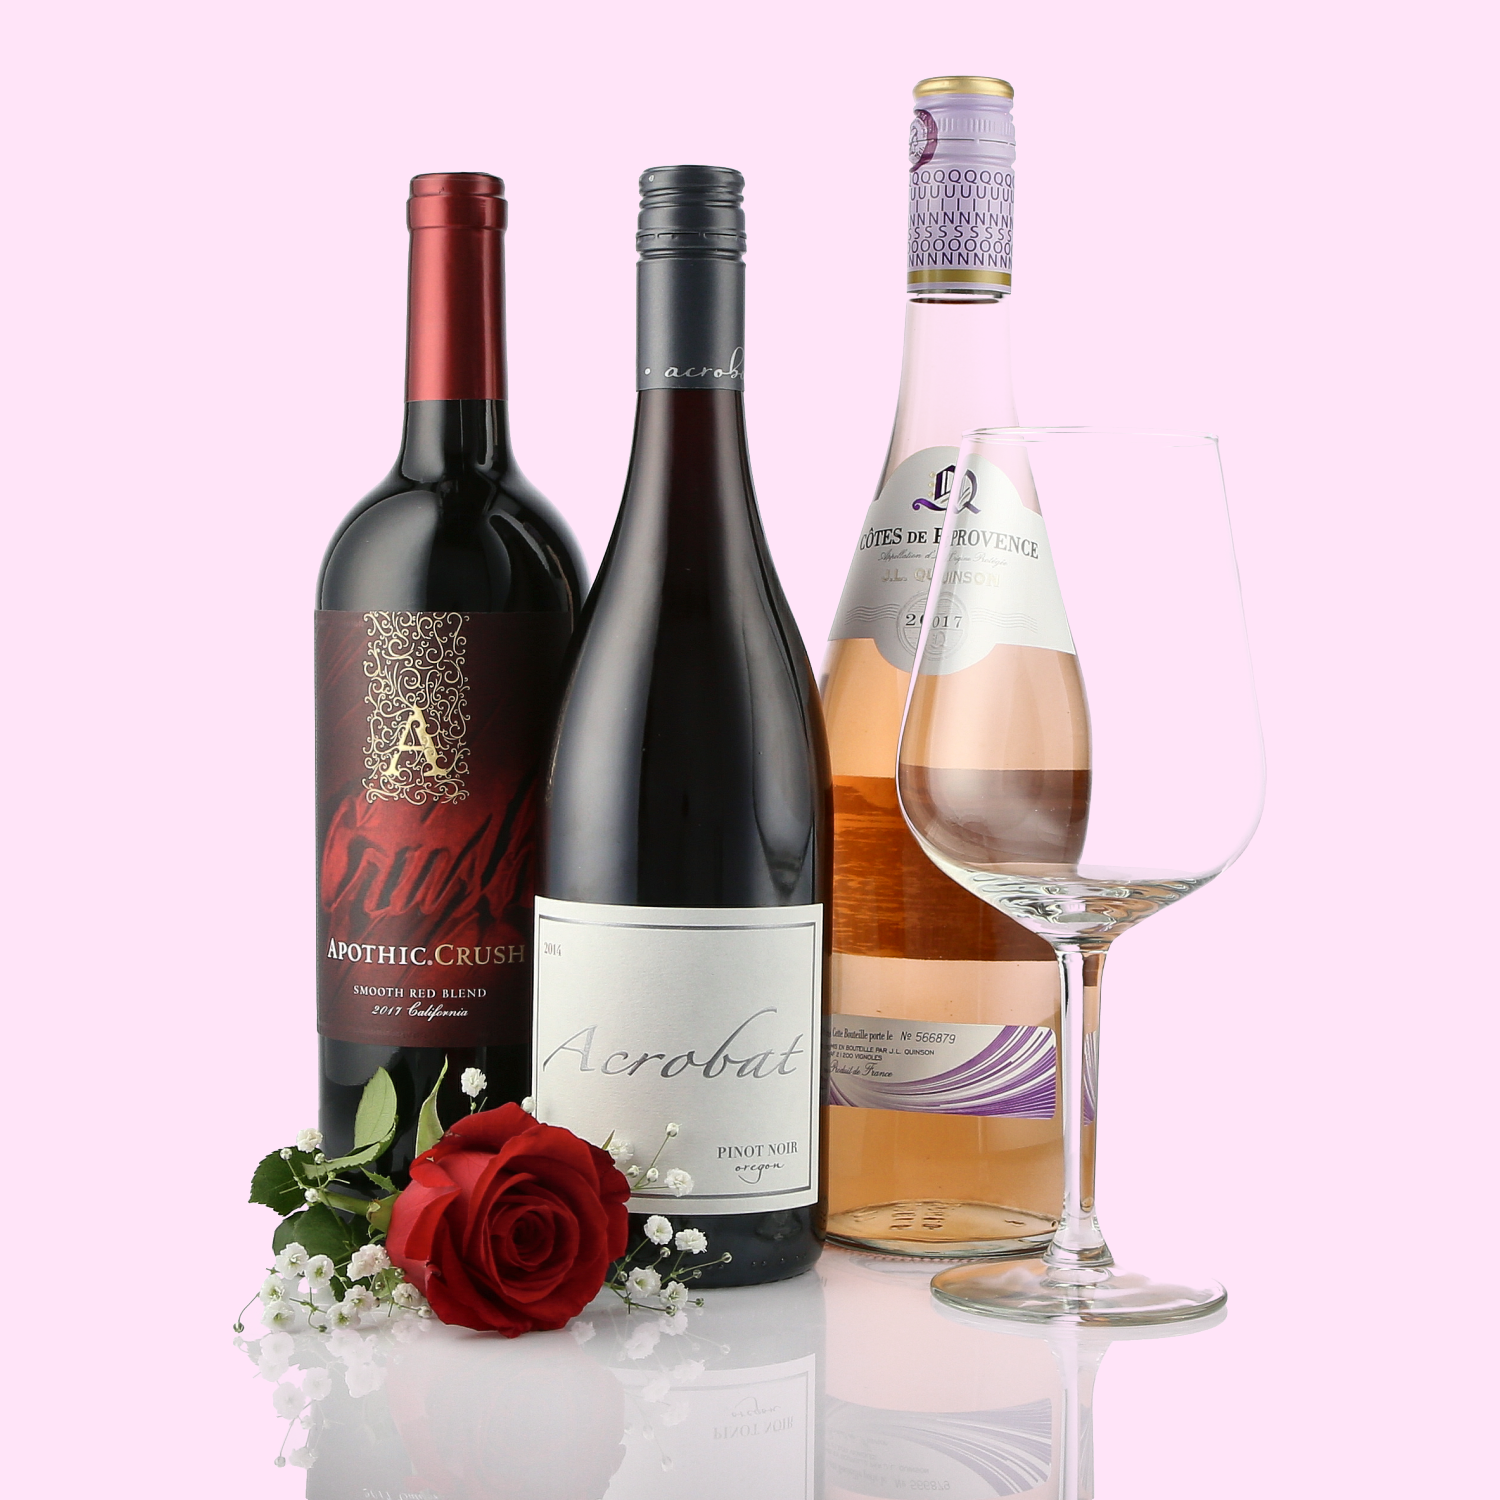 Sample Wine Product image with wine glass and rose on a pink background for Valentine  Social Media Marketing Campaigns